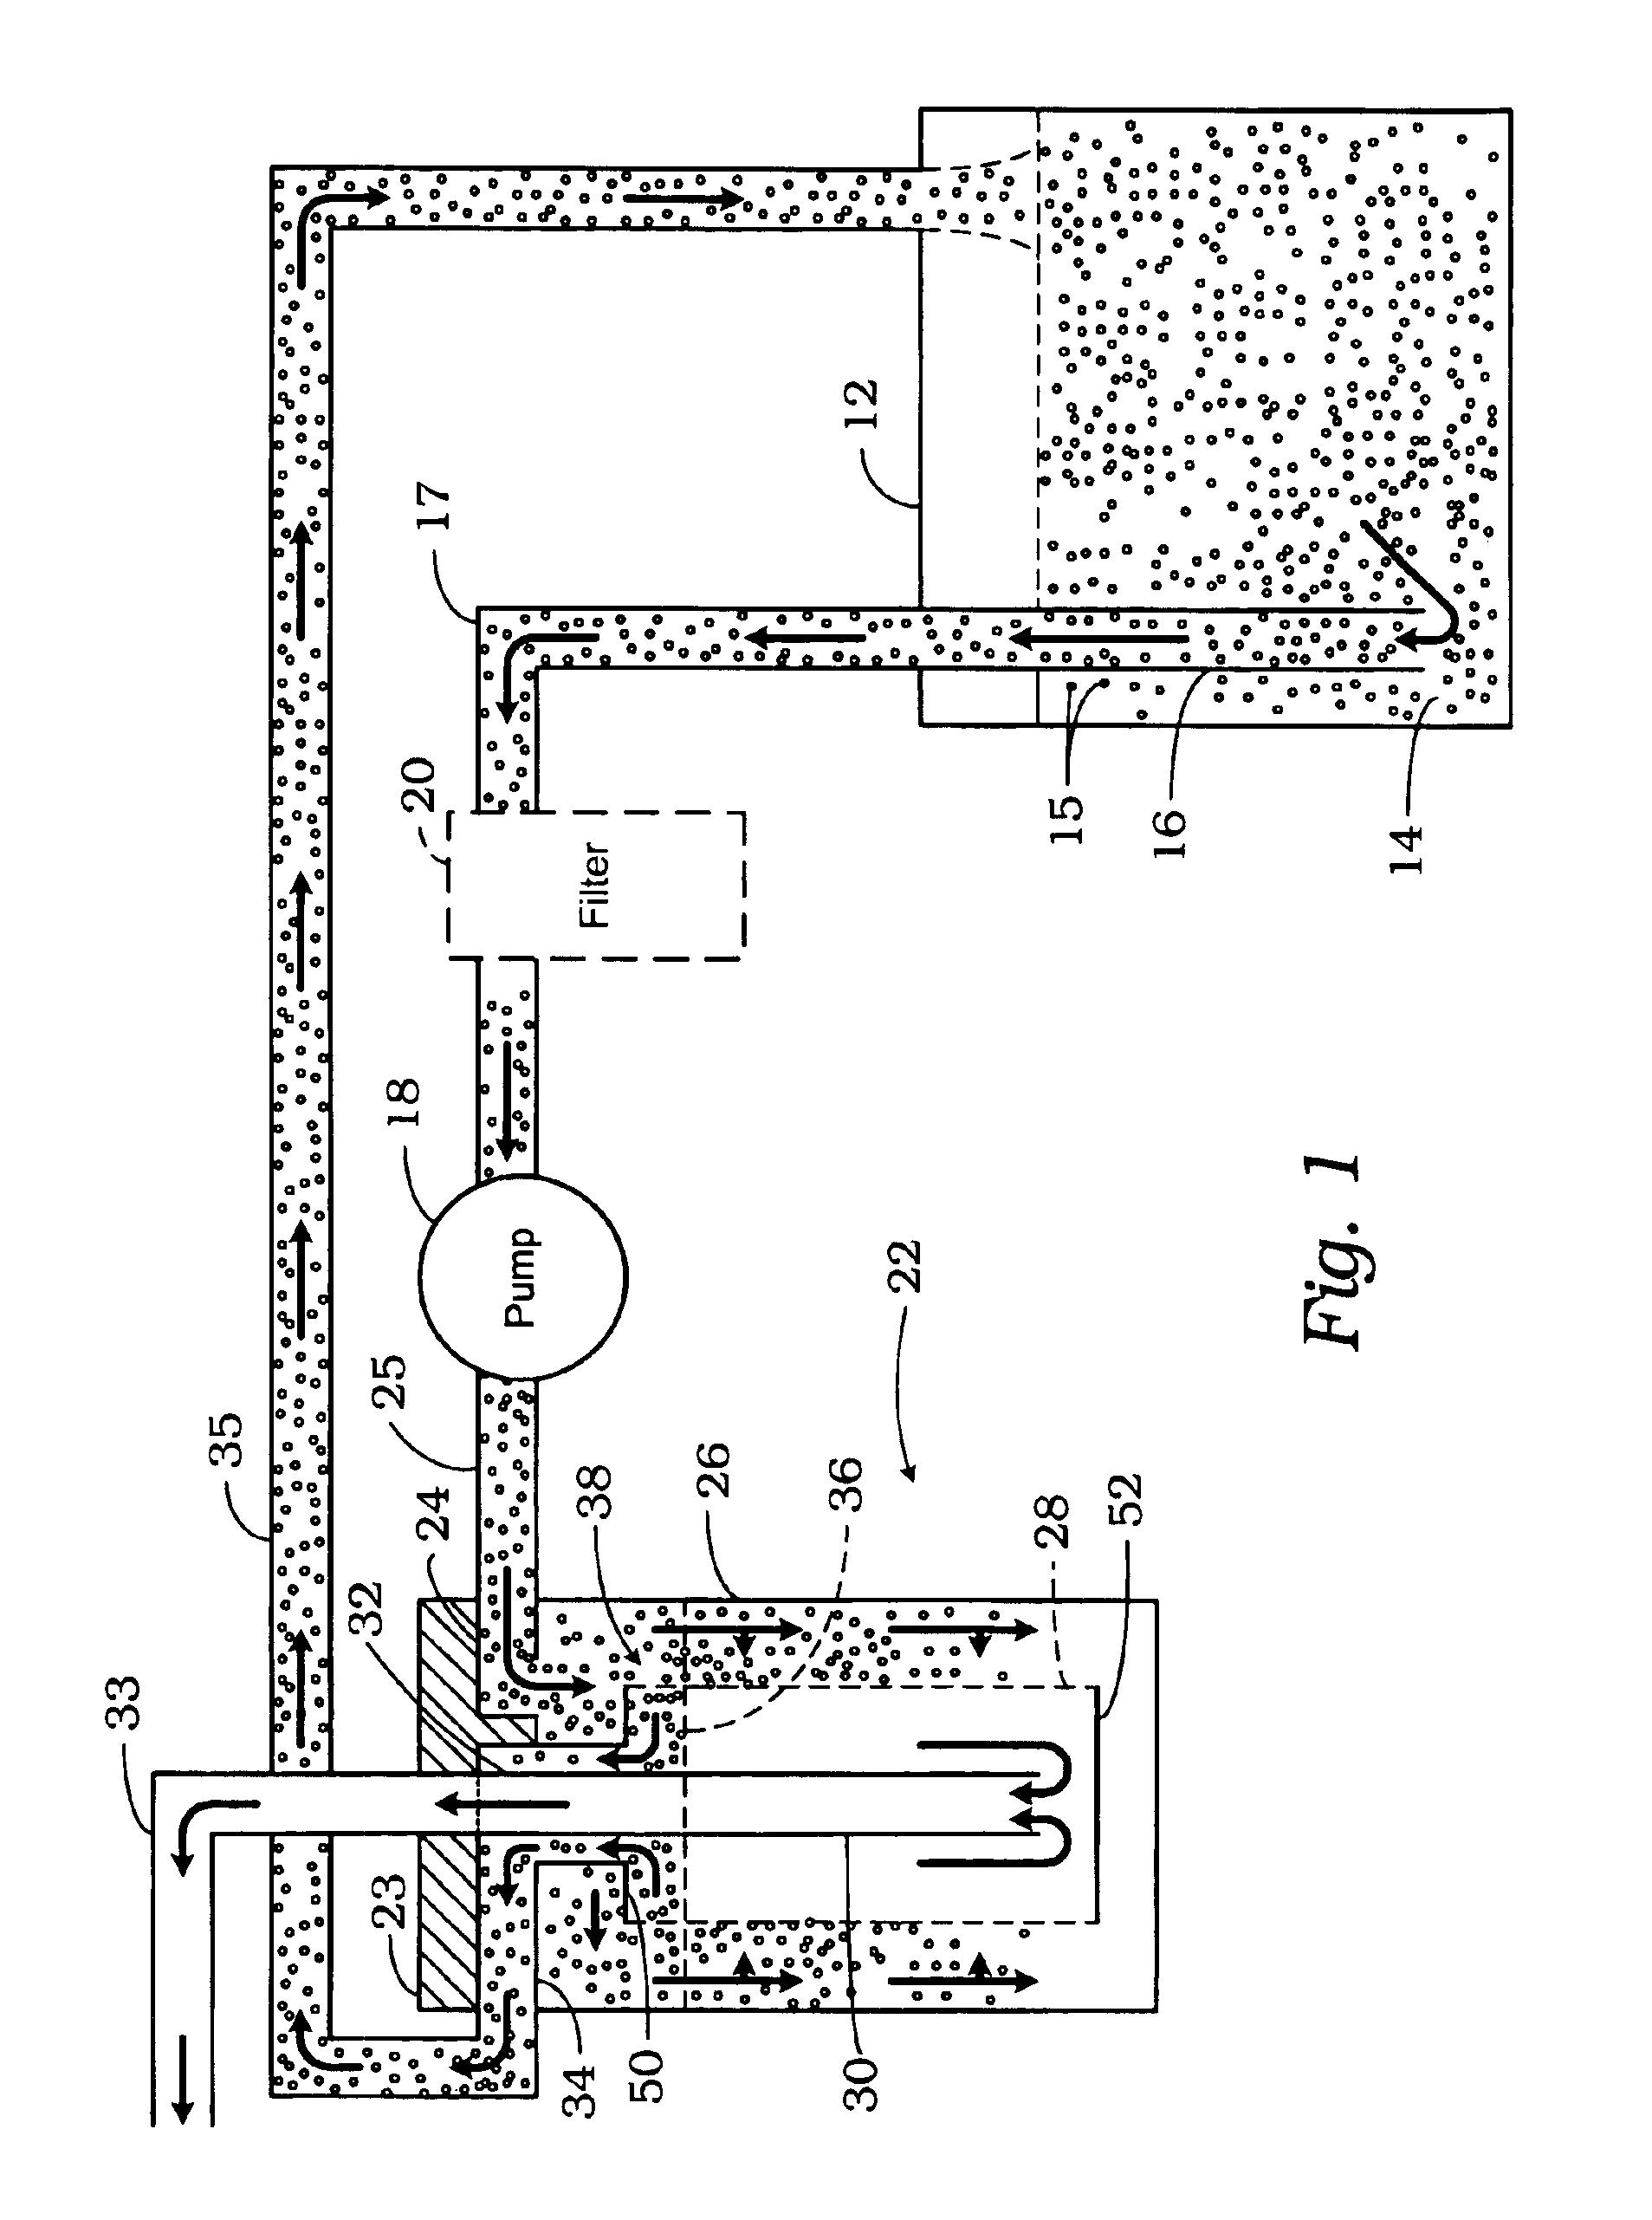 Fuel/air separation system